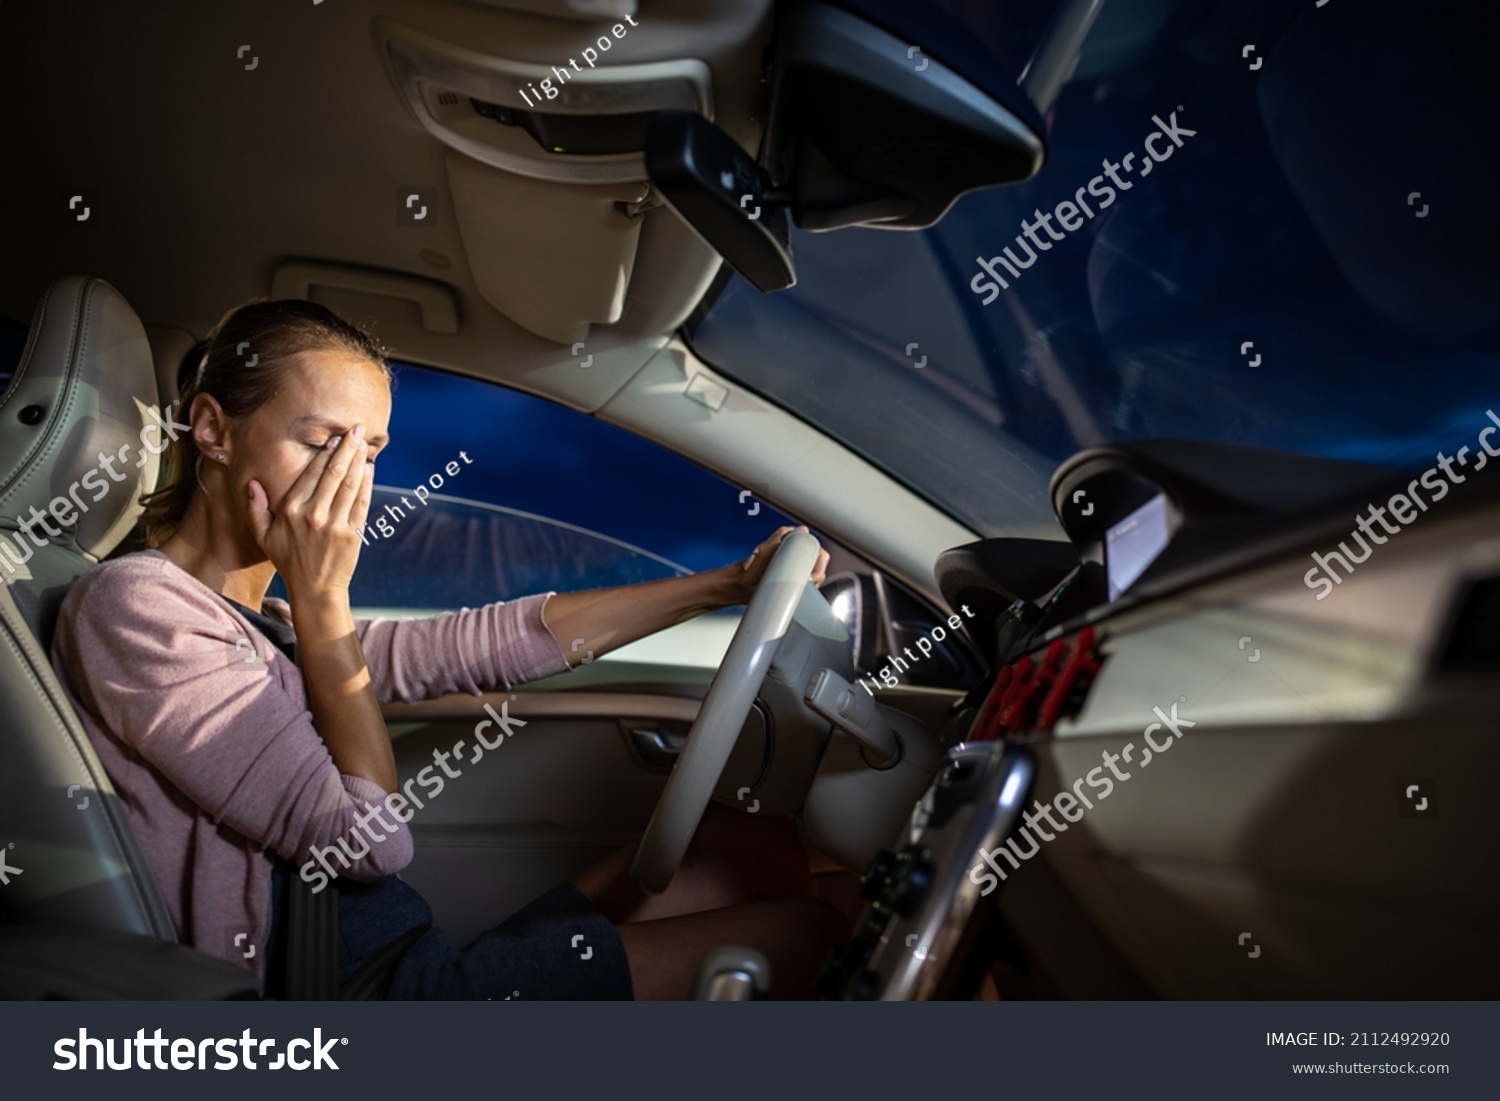 Young female driver at the wheel of her car, super tired, falling asleep while driving in a potentially dangerous situation - Road safety concept #2112492920